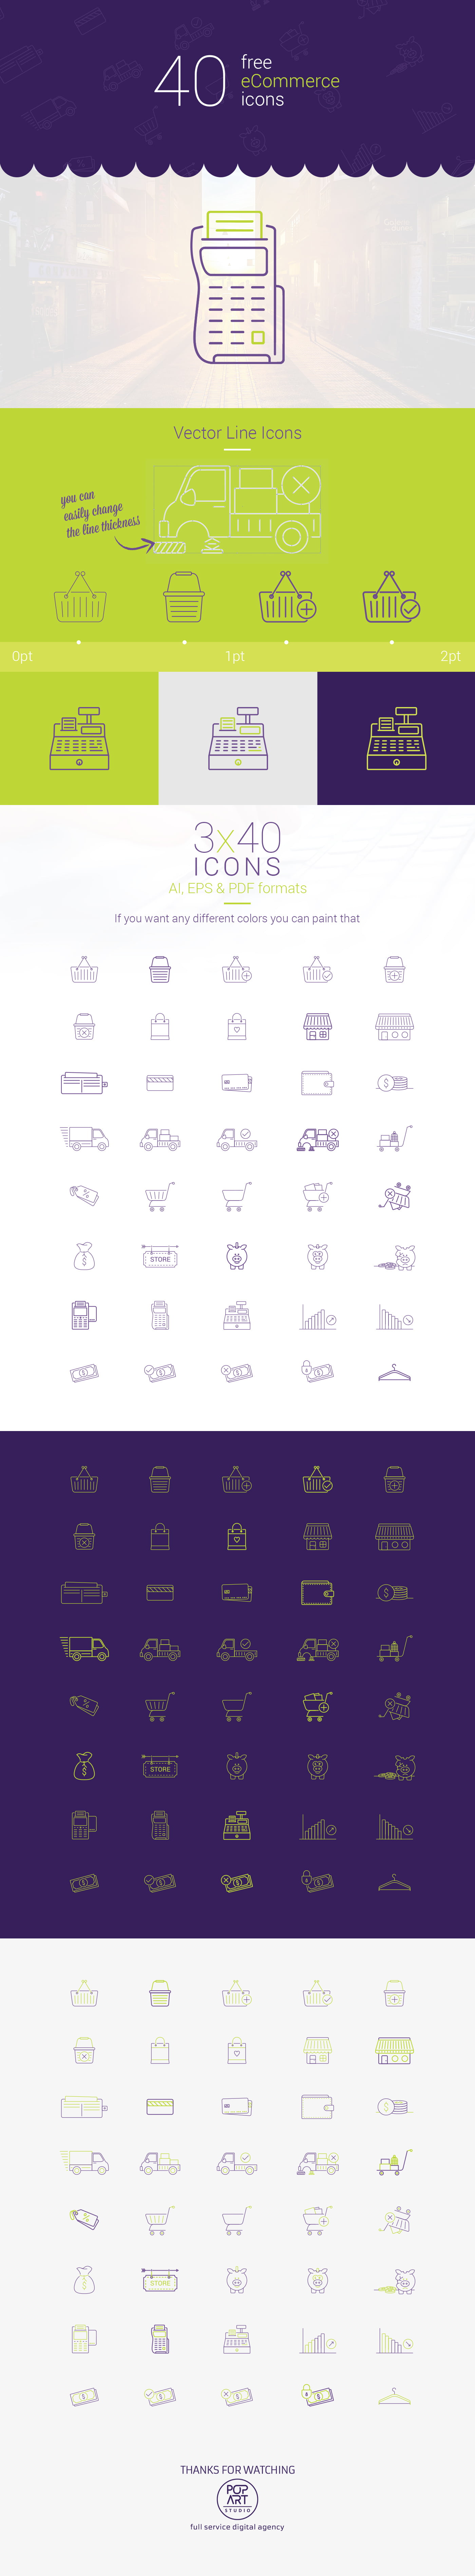 ecommerce vector icons